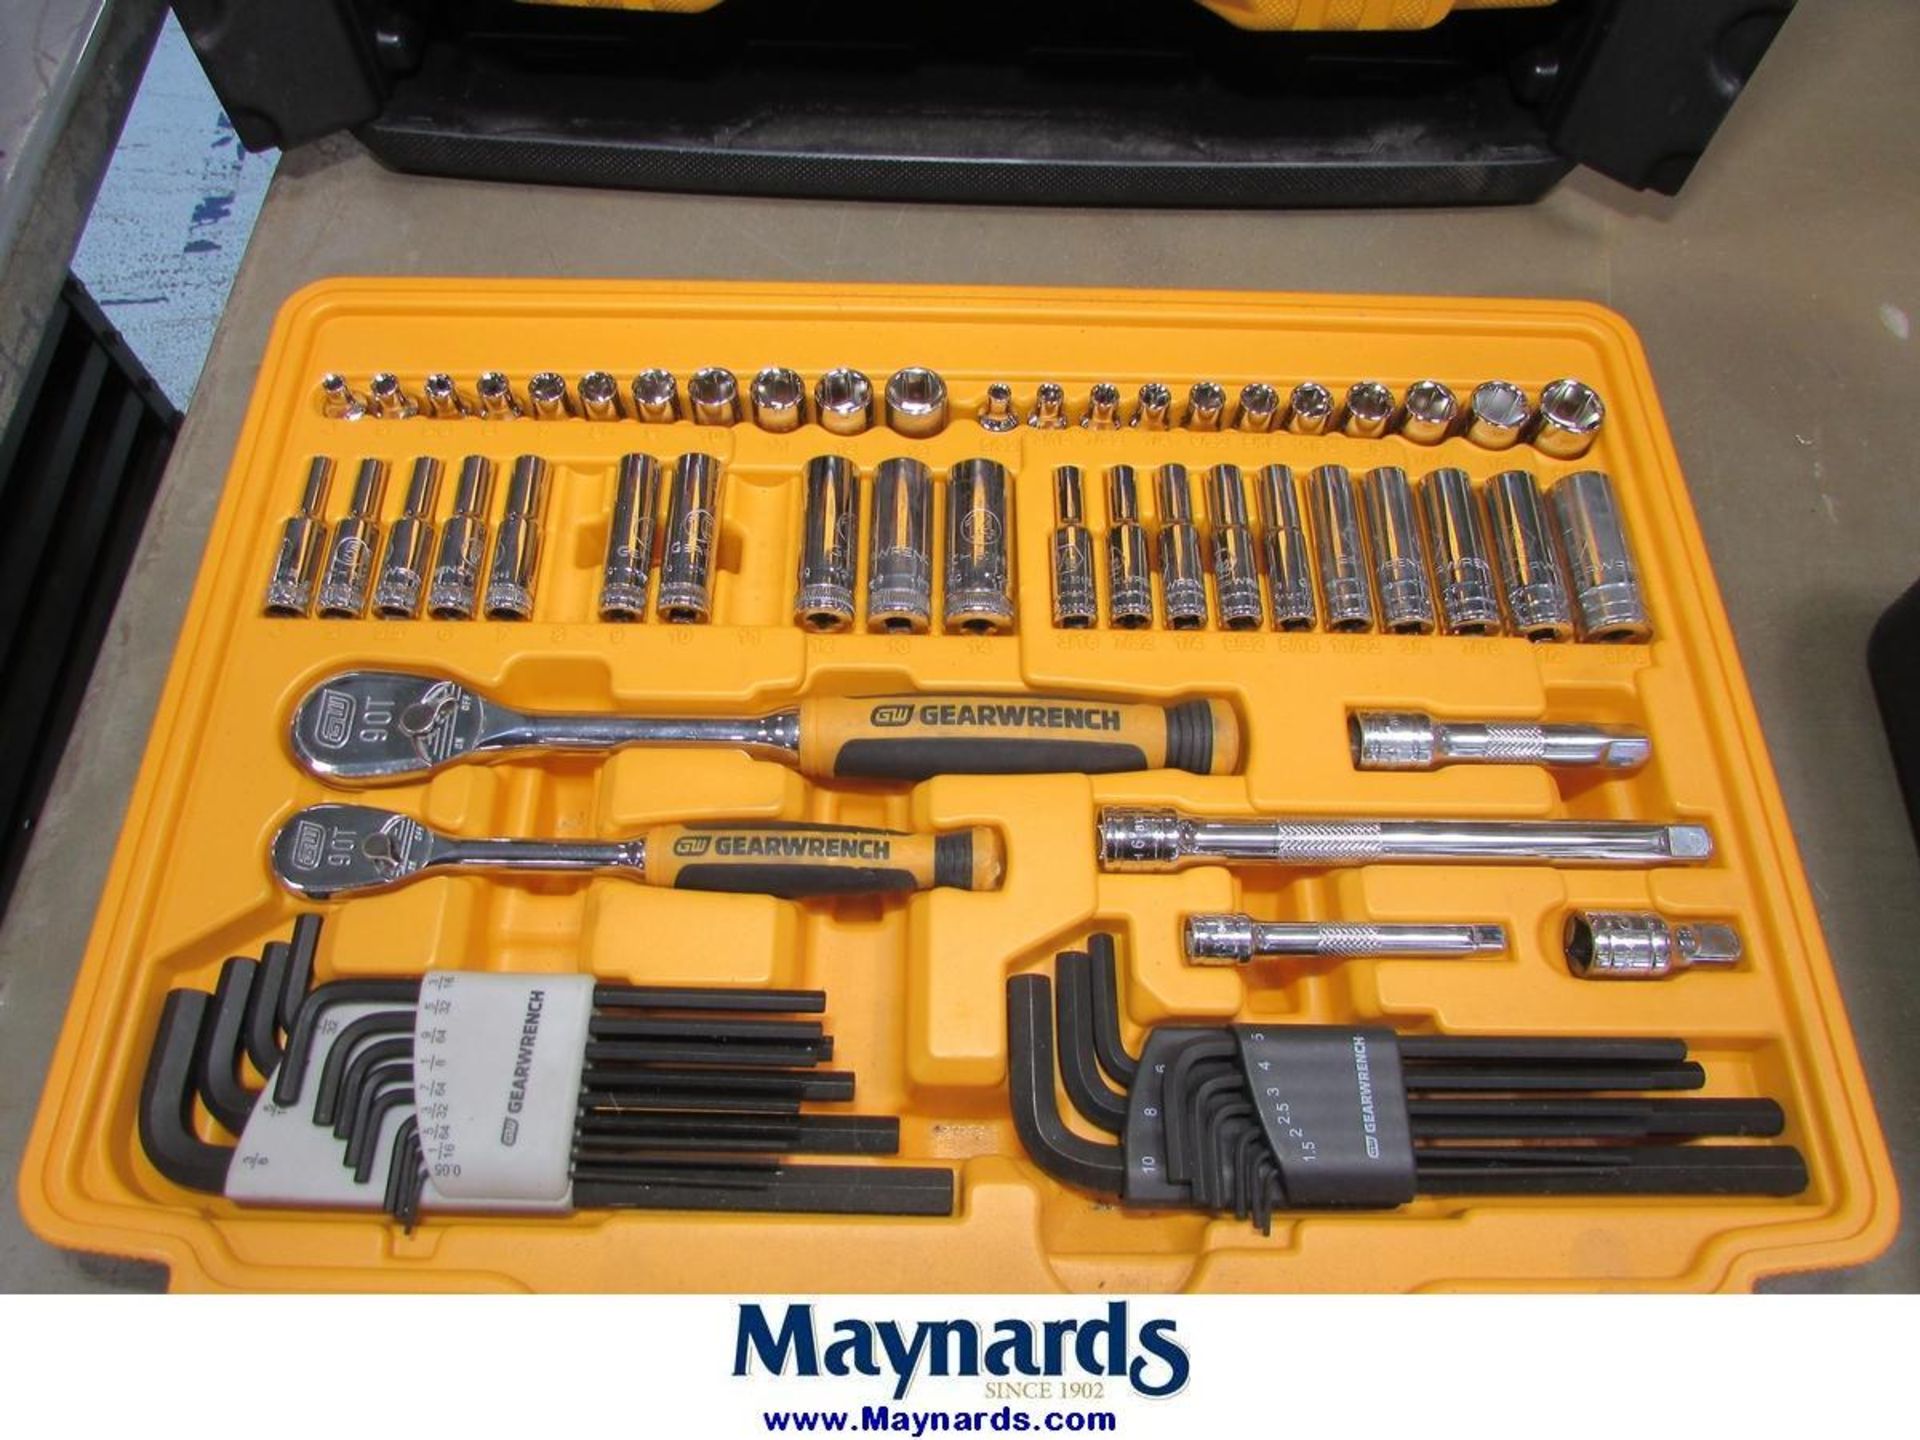 Gear Wrench Plastic Toolbox with Wrench, Socket and Driver Hand Tools - Image 6 of 6